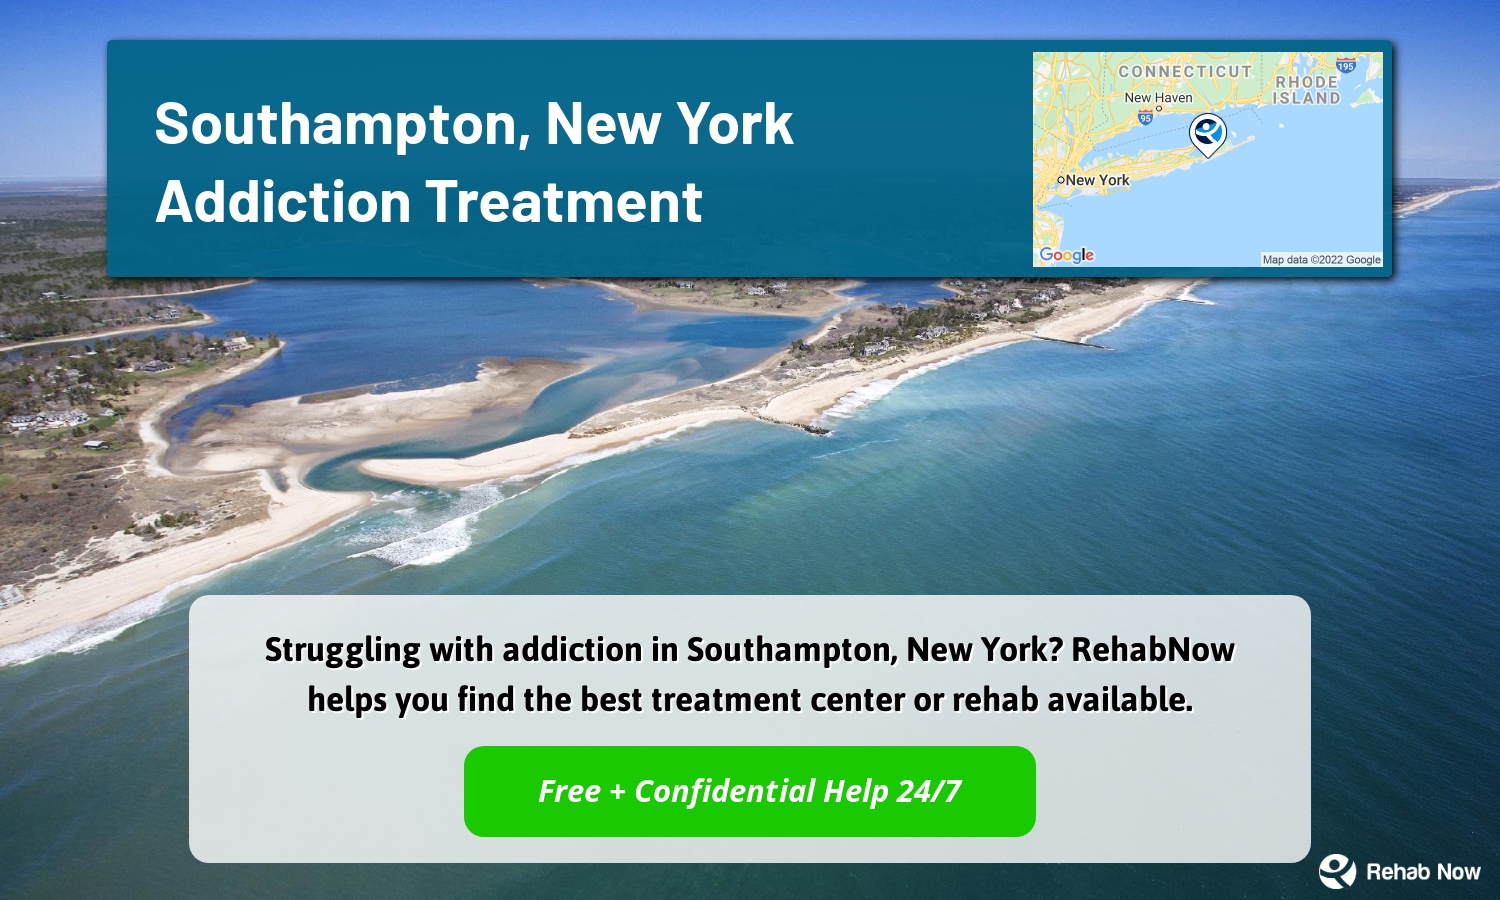 Struggling with addiction in Southampton, New York? RehabNow helps you find the best treatment center or rehab available.